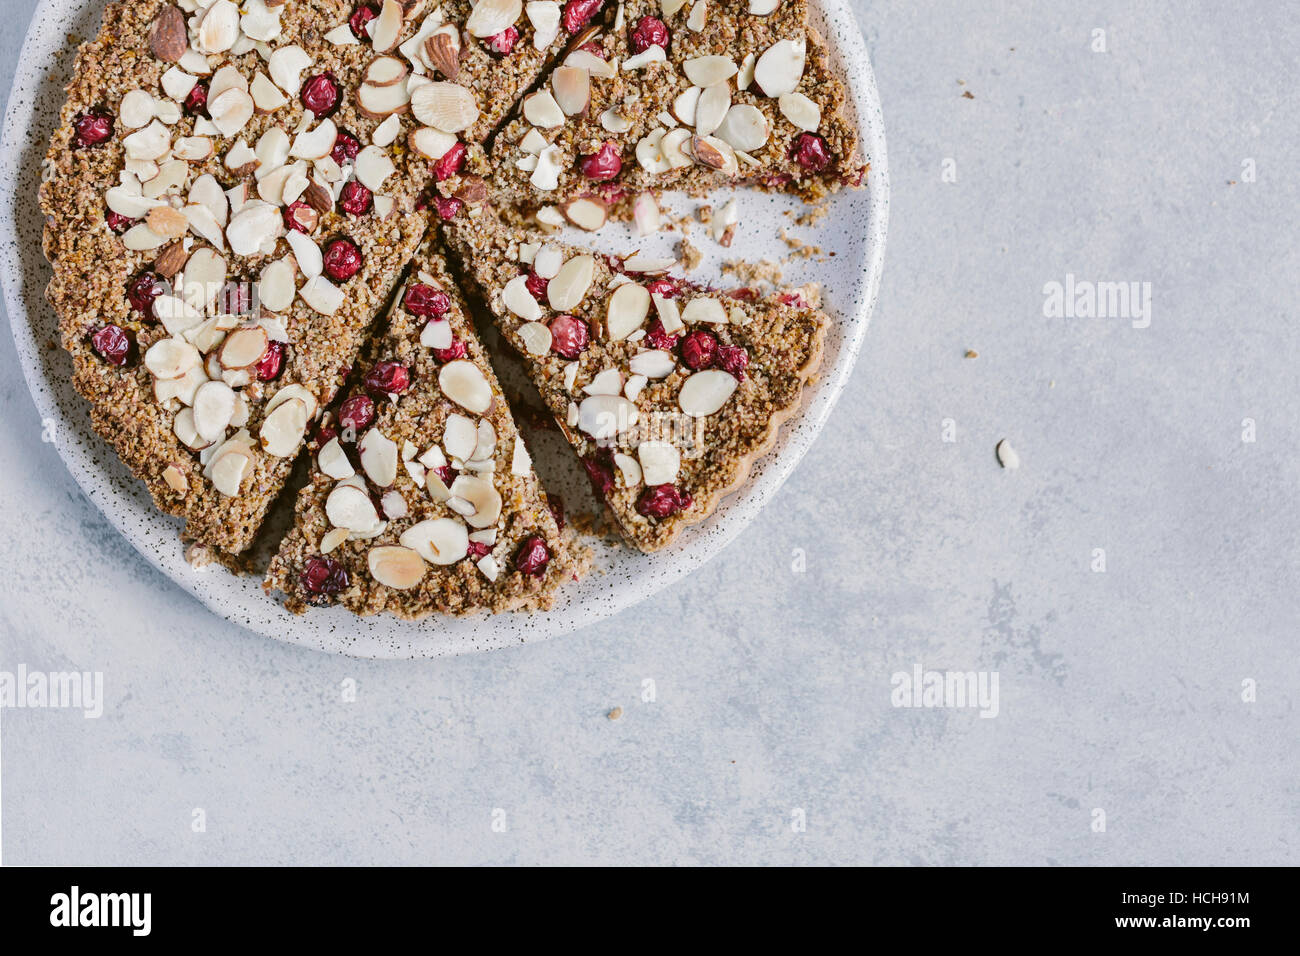 A sliced cranberry almond tart is photographed from the top view. Stock Photo